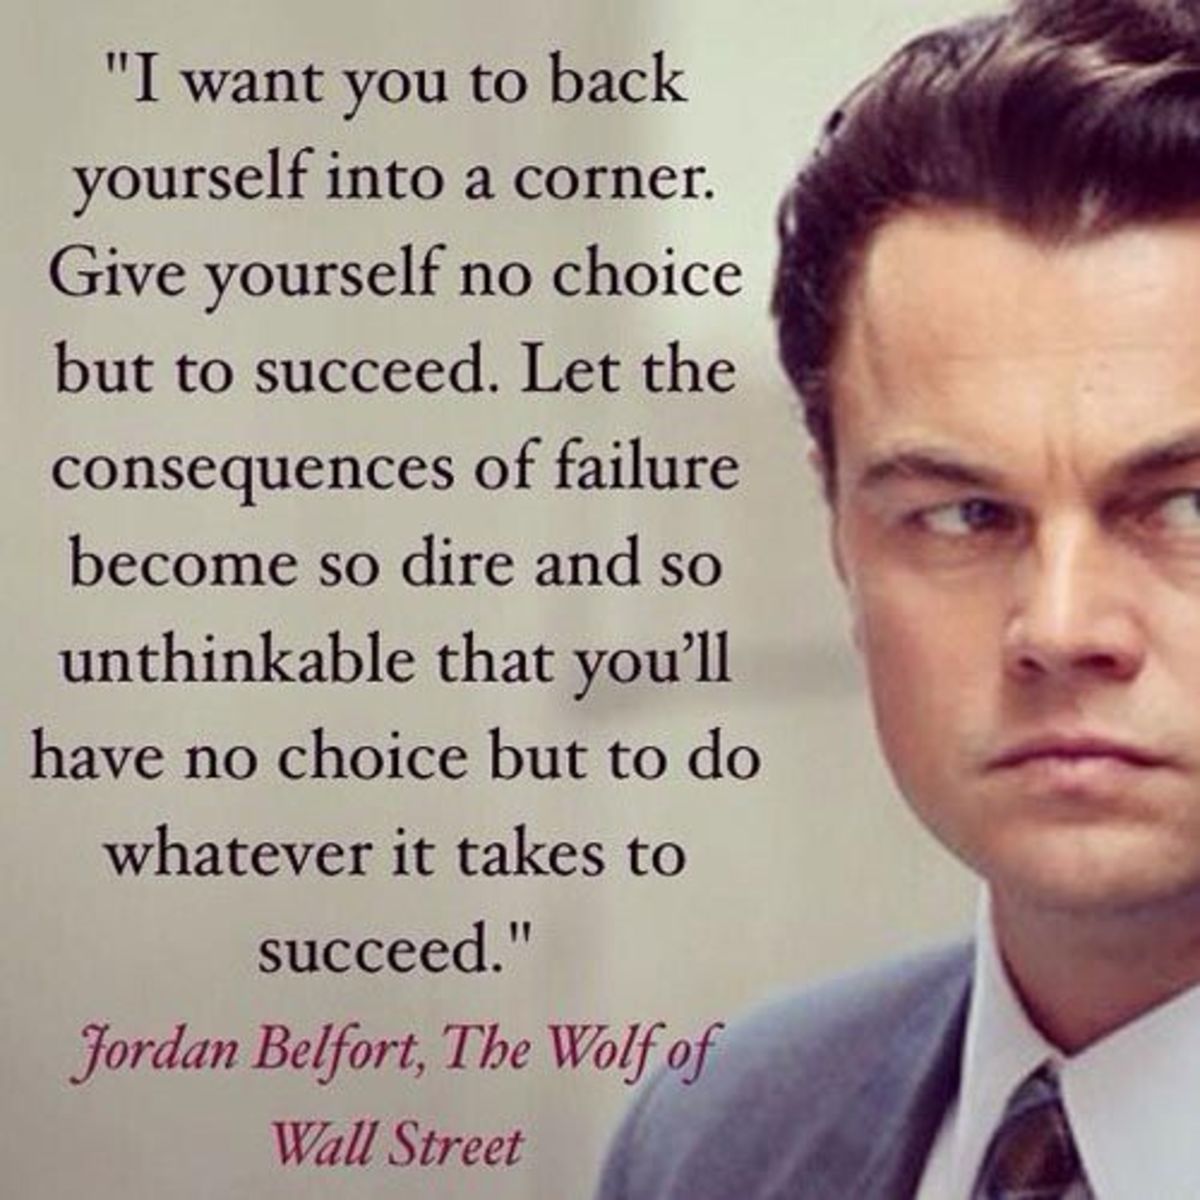 The Wolf of Wall Street, 2013